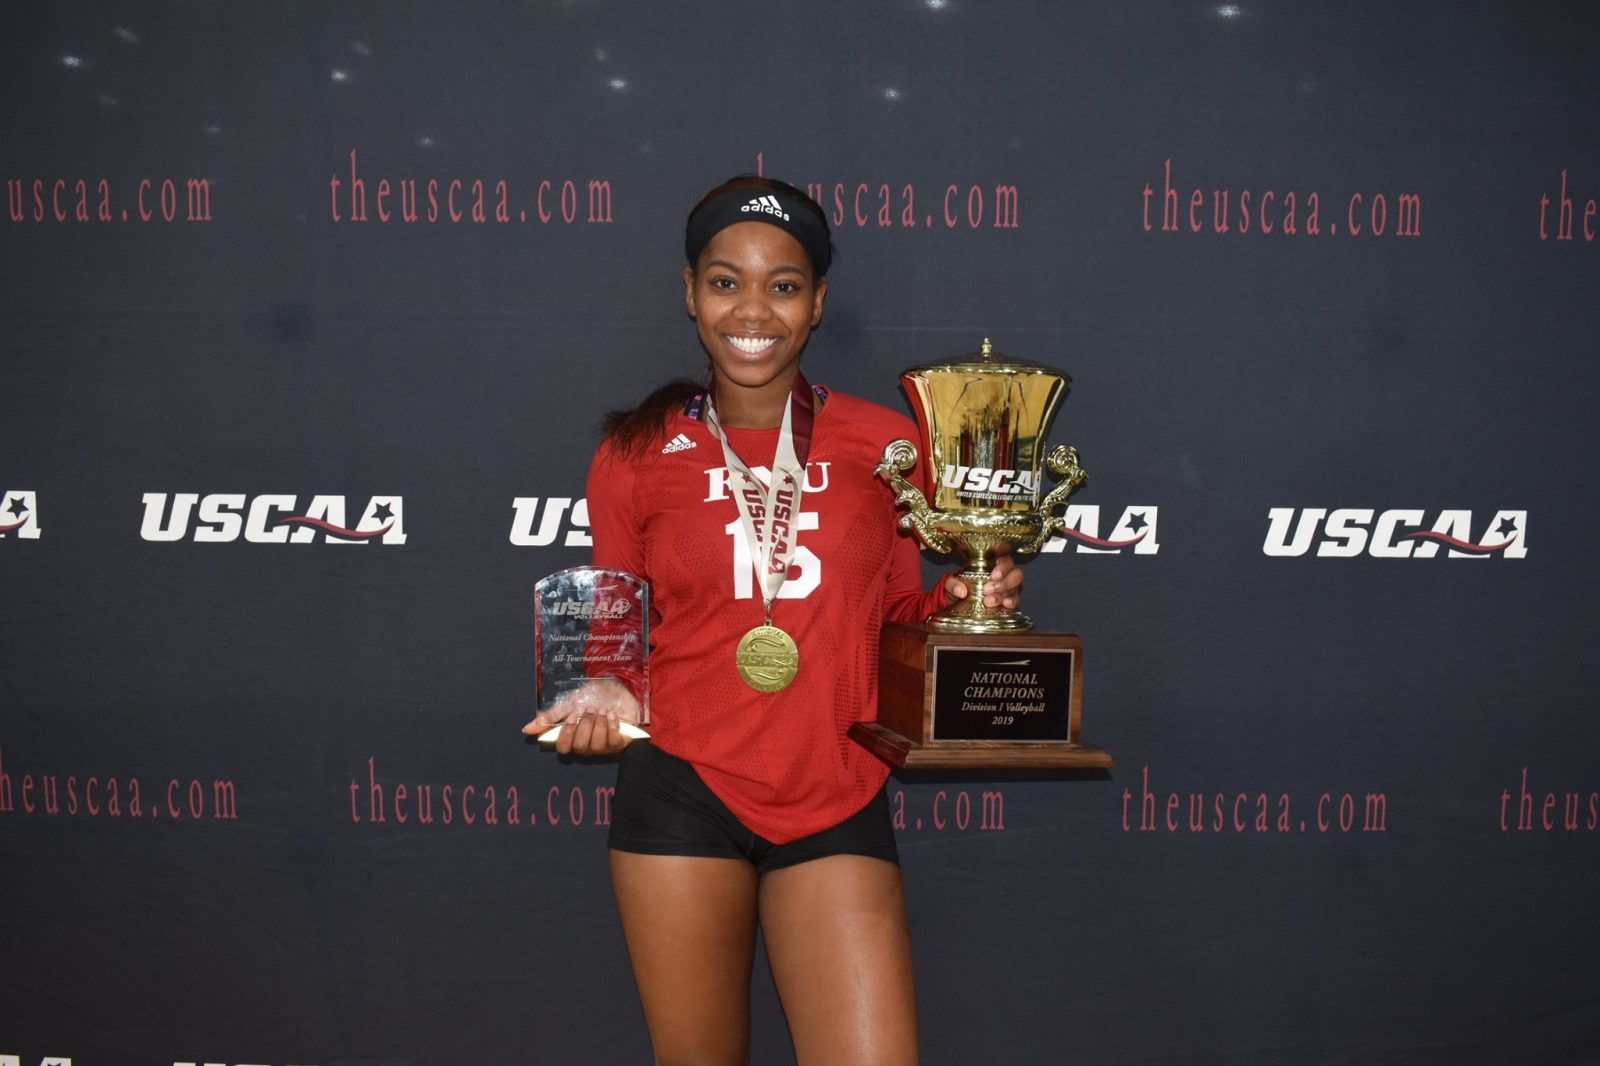 Ashley Williams Volleyball player with the awards received